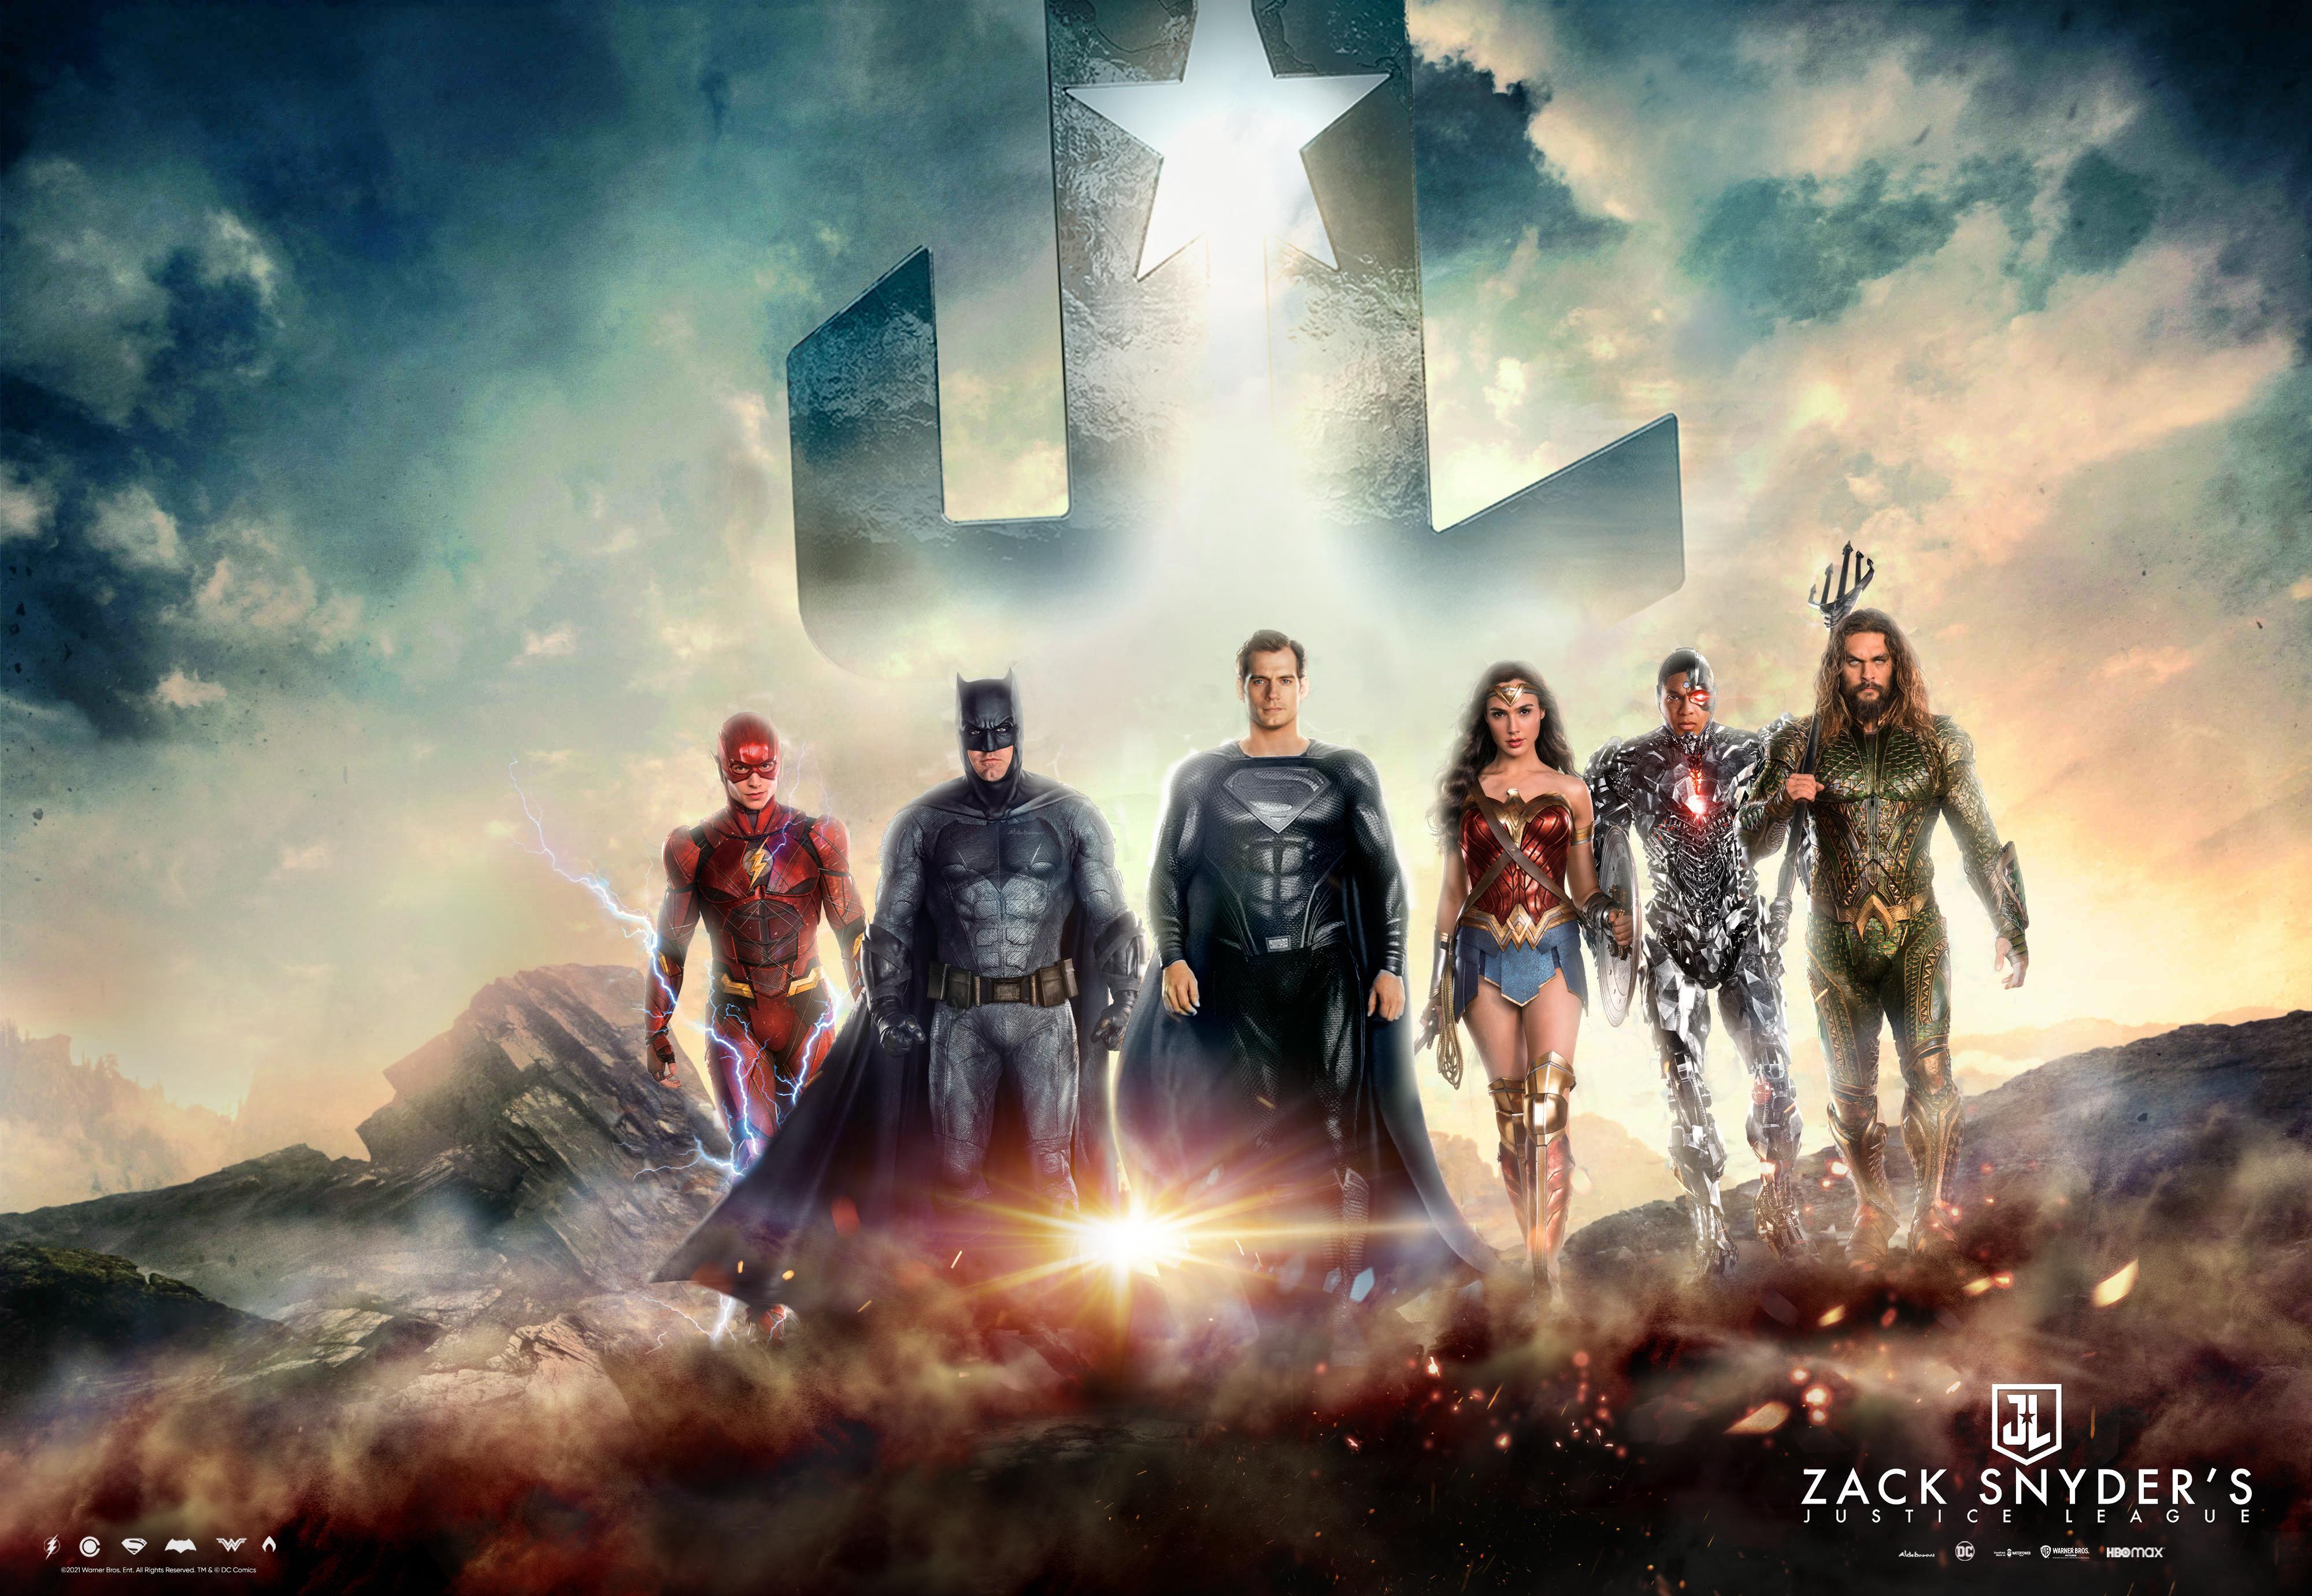 Zack Snyders Justice League Wallpapers Top Free Zack Snyders Justice League Backgrounds 